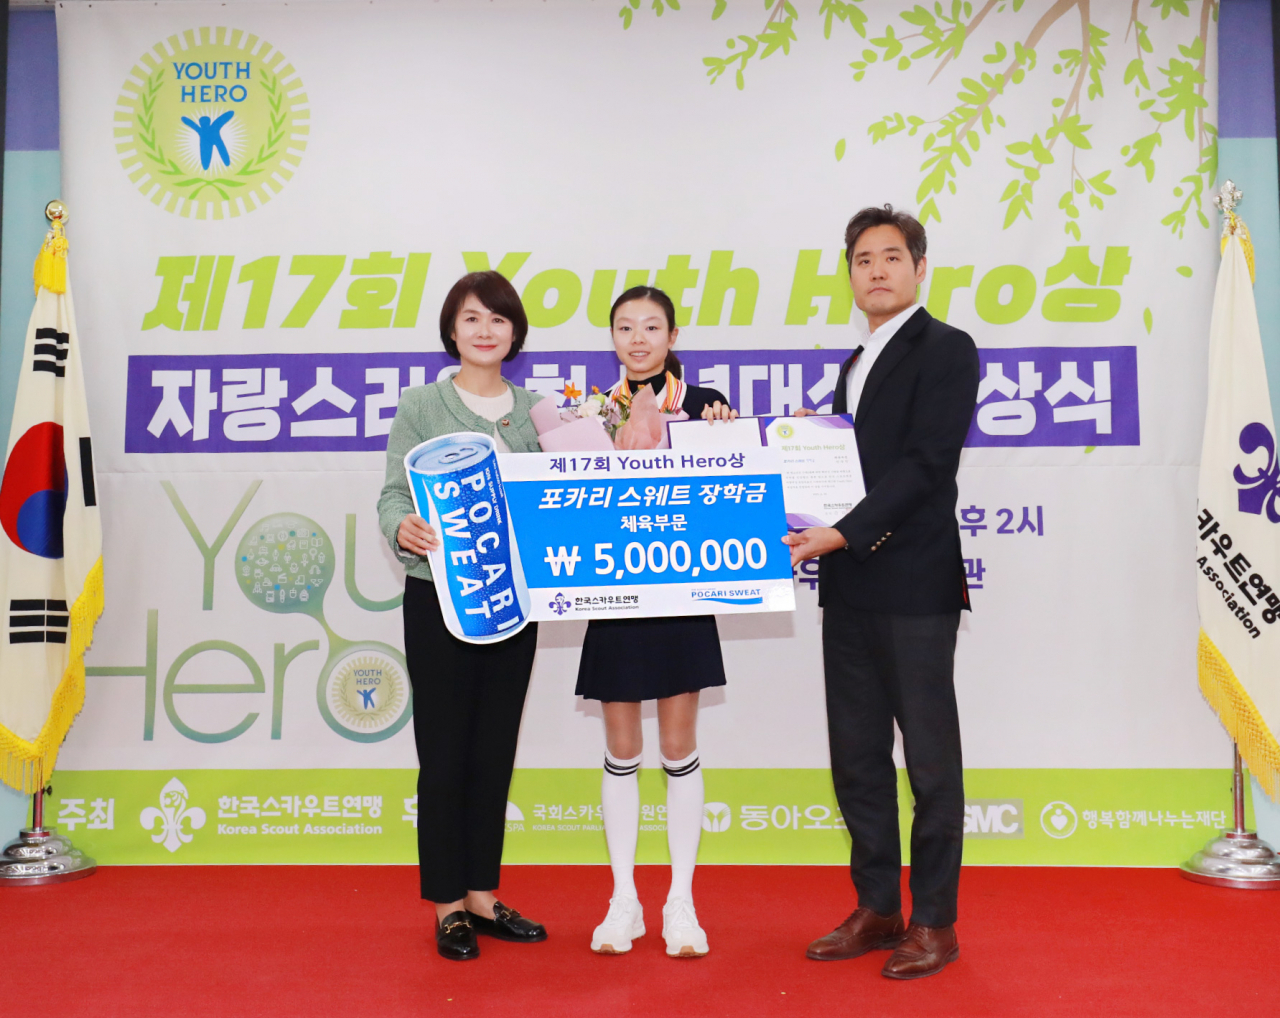 Modern pentathlete Shin Su-min (center) poses for a photo during the Youth Hero Prize ceremony held at the Korea Scout Association's headquarters in Seoul on Thursday. (Dong-A Otsuka)